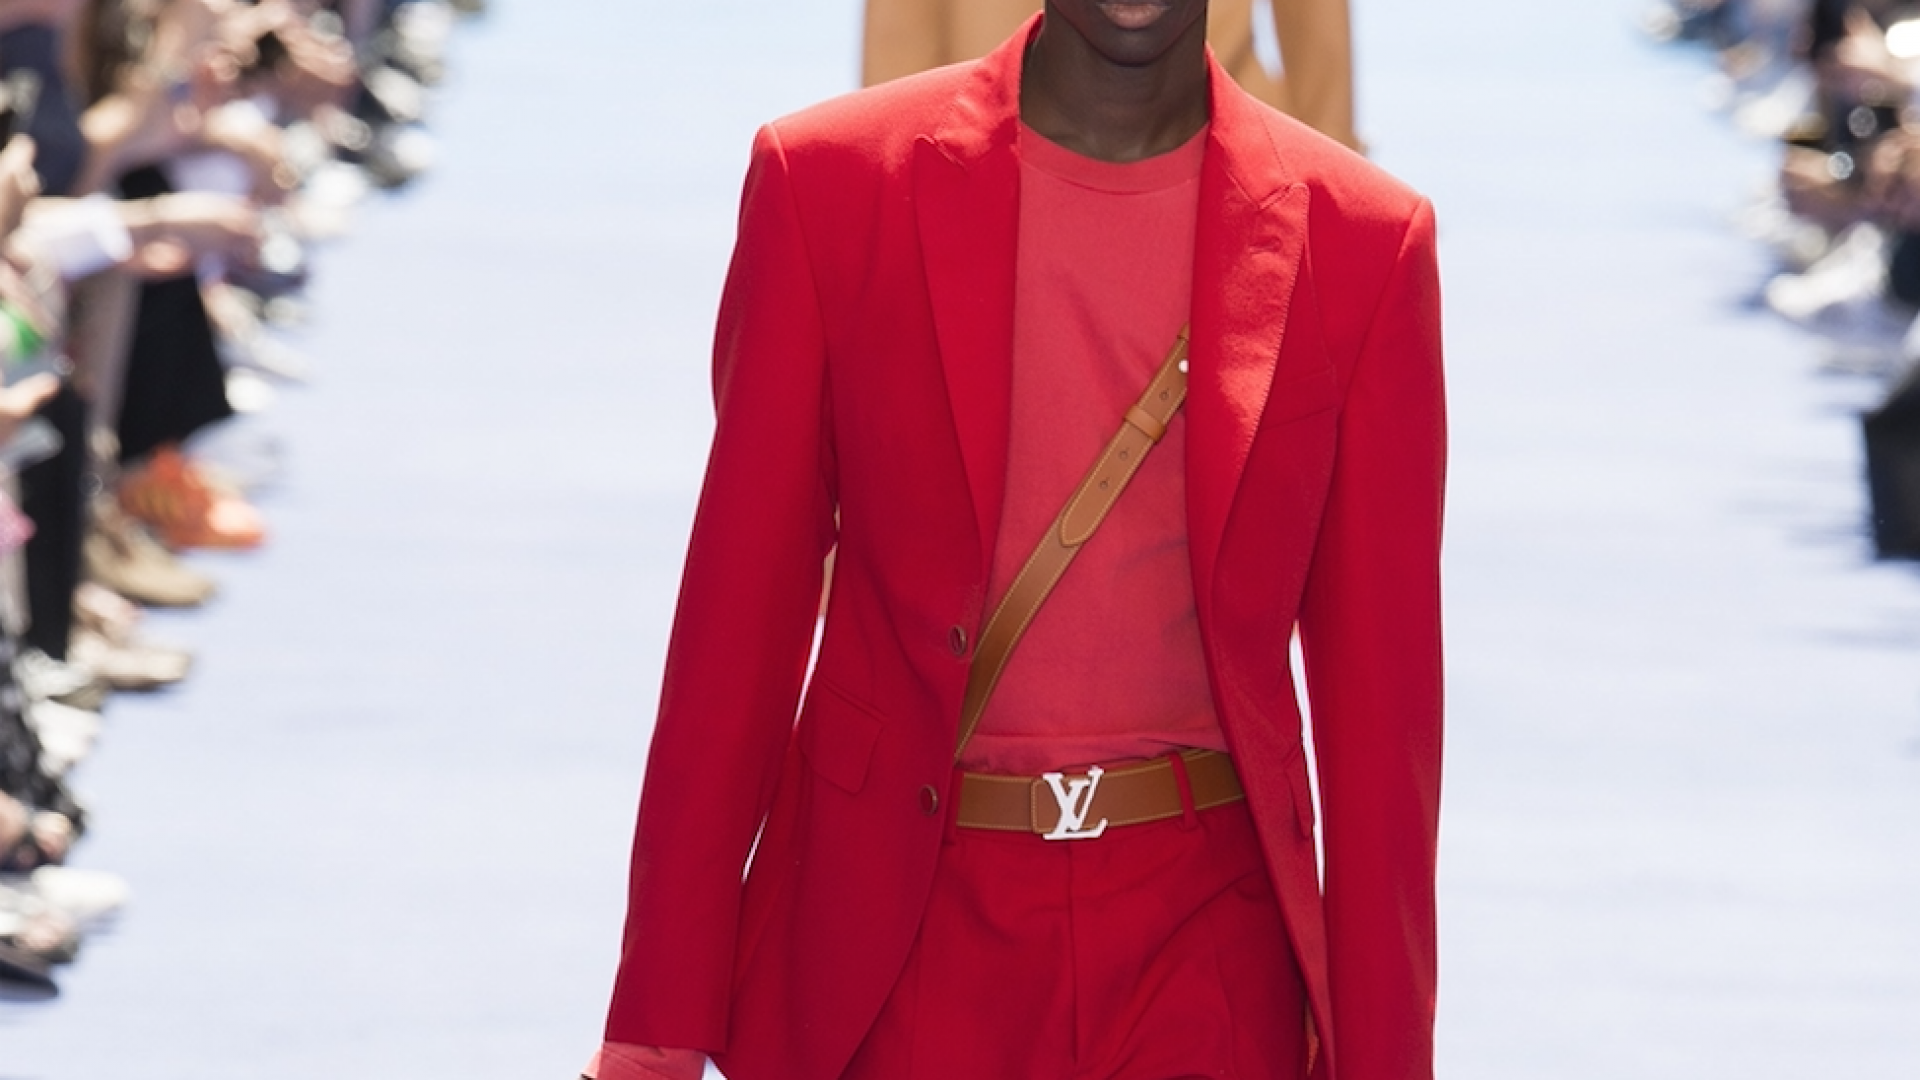 Men’s Fashion Report: Go Bold For Spring With Colorful Streetwear!